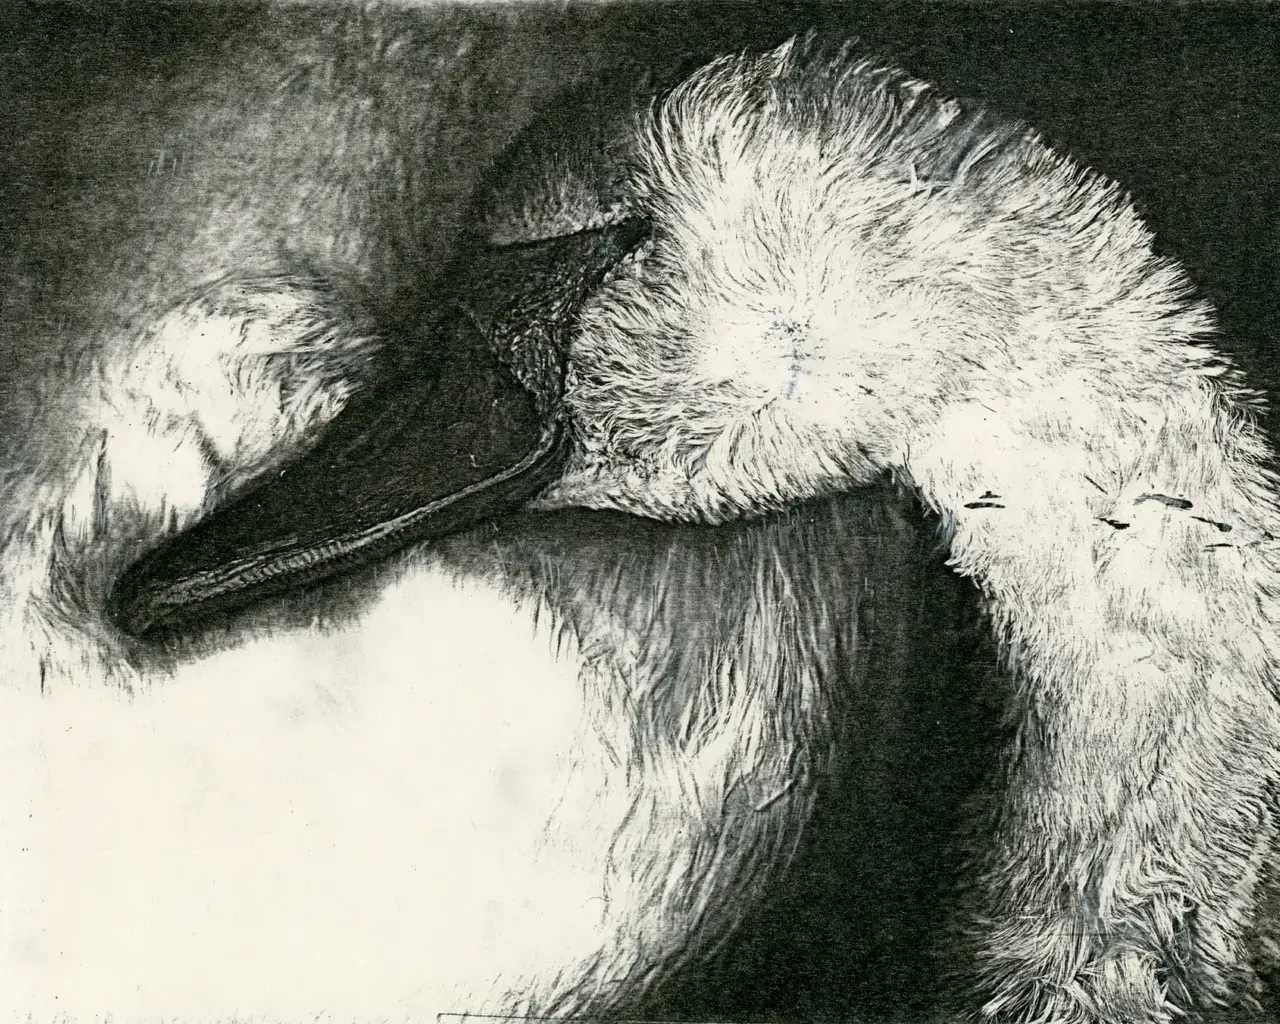 Pati Hill, A Swan: An Opera in Nine Chapters&nbsp;(detail from Chapter 1), 1978, black &amp; white copier print, 8 1/8&rdquo; x 10 11/16&rdquo;, from an installation comprised of 32 captioned copier prints. Courtesy of the Estate of Pati Hill.